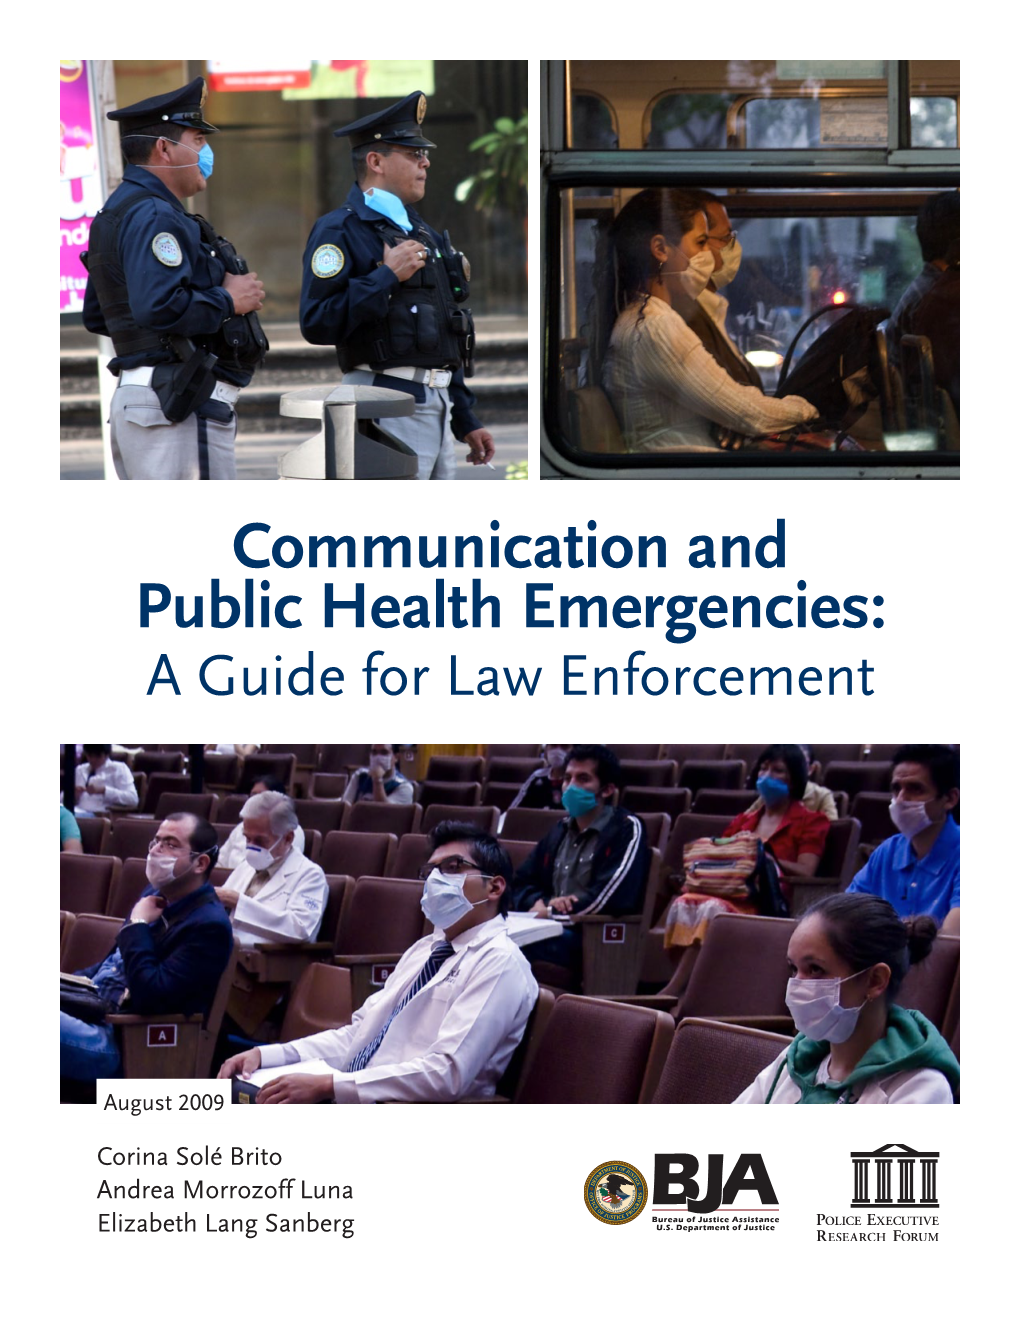 Communication and Public Health Emergencies: a Guide for Law Enforcement